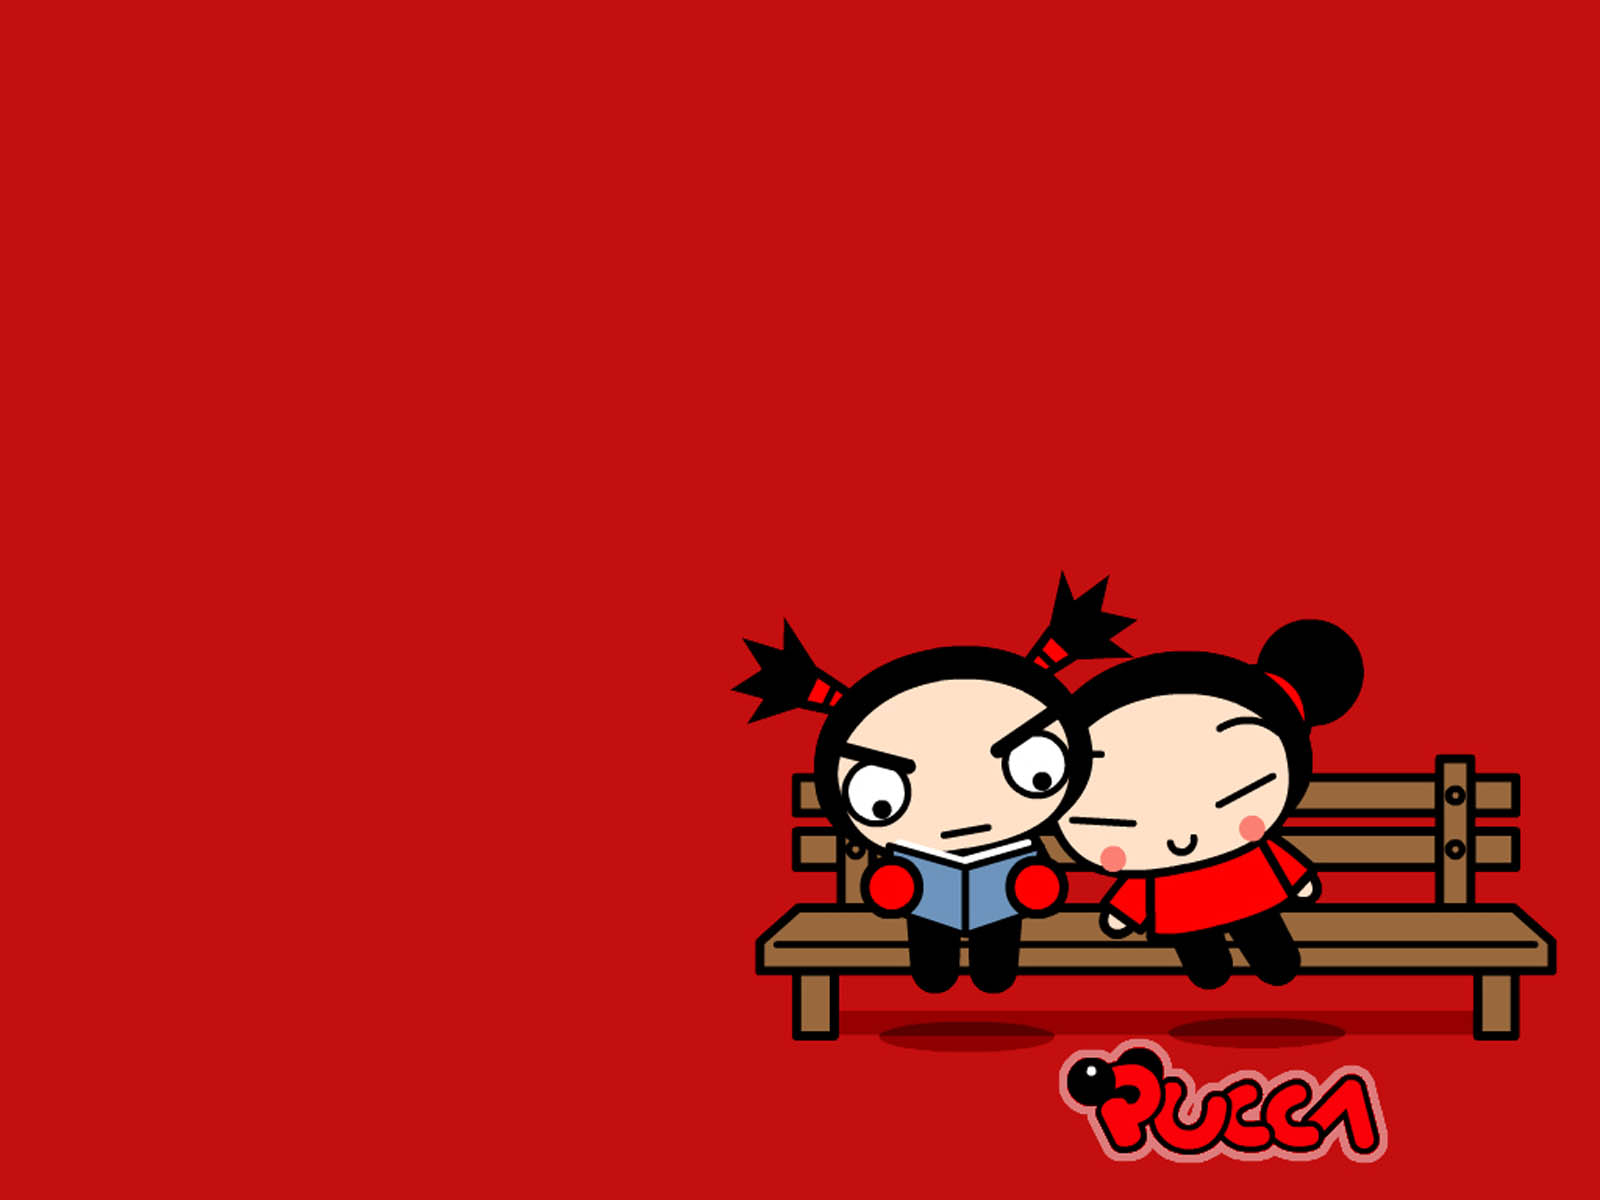 You are watching the Pucca Wallpapers, Pucca Desktop Wallpapers, Pucca Back...